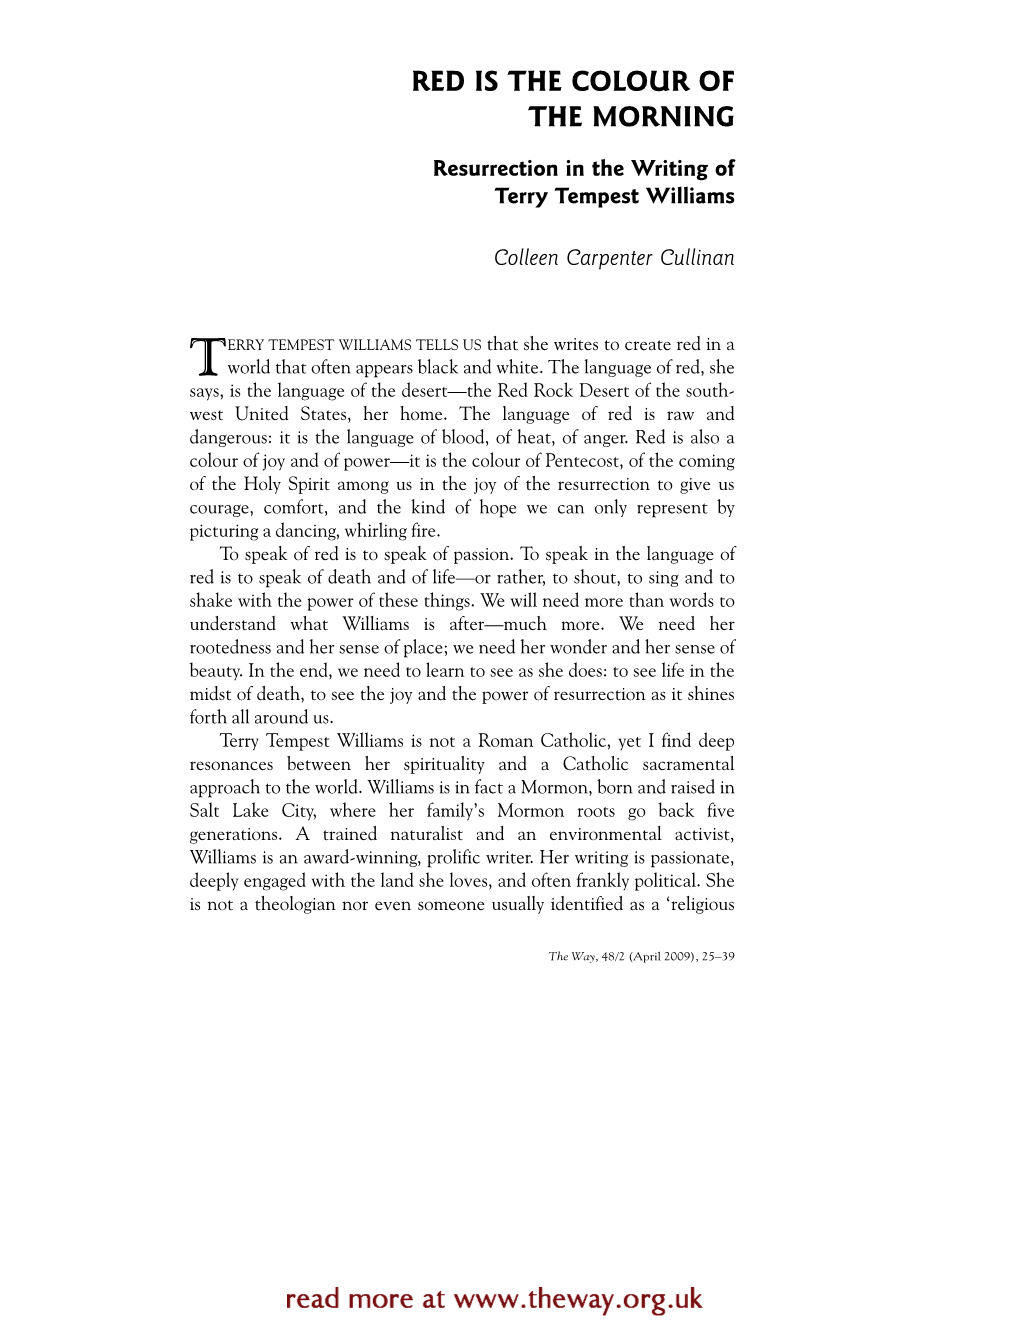 Resurrection in the Writing of Terry Tempest Williams